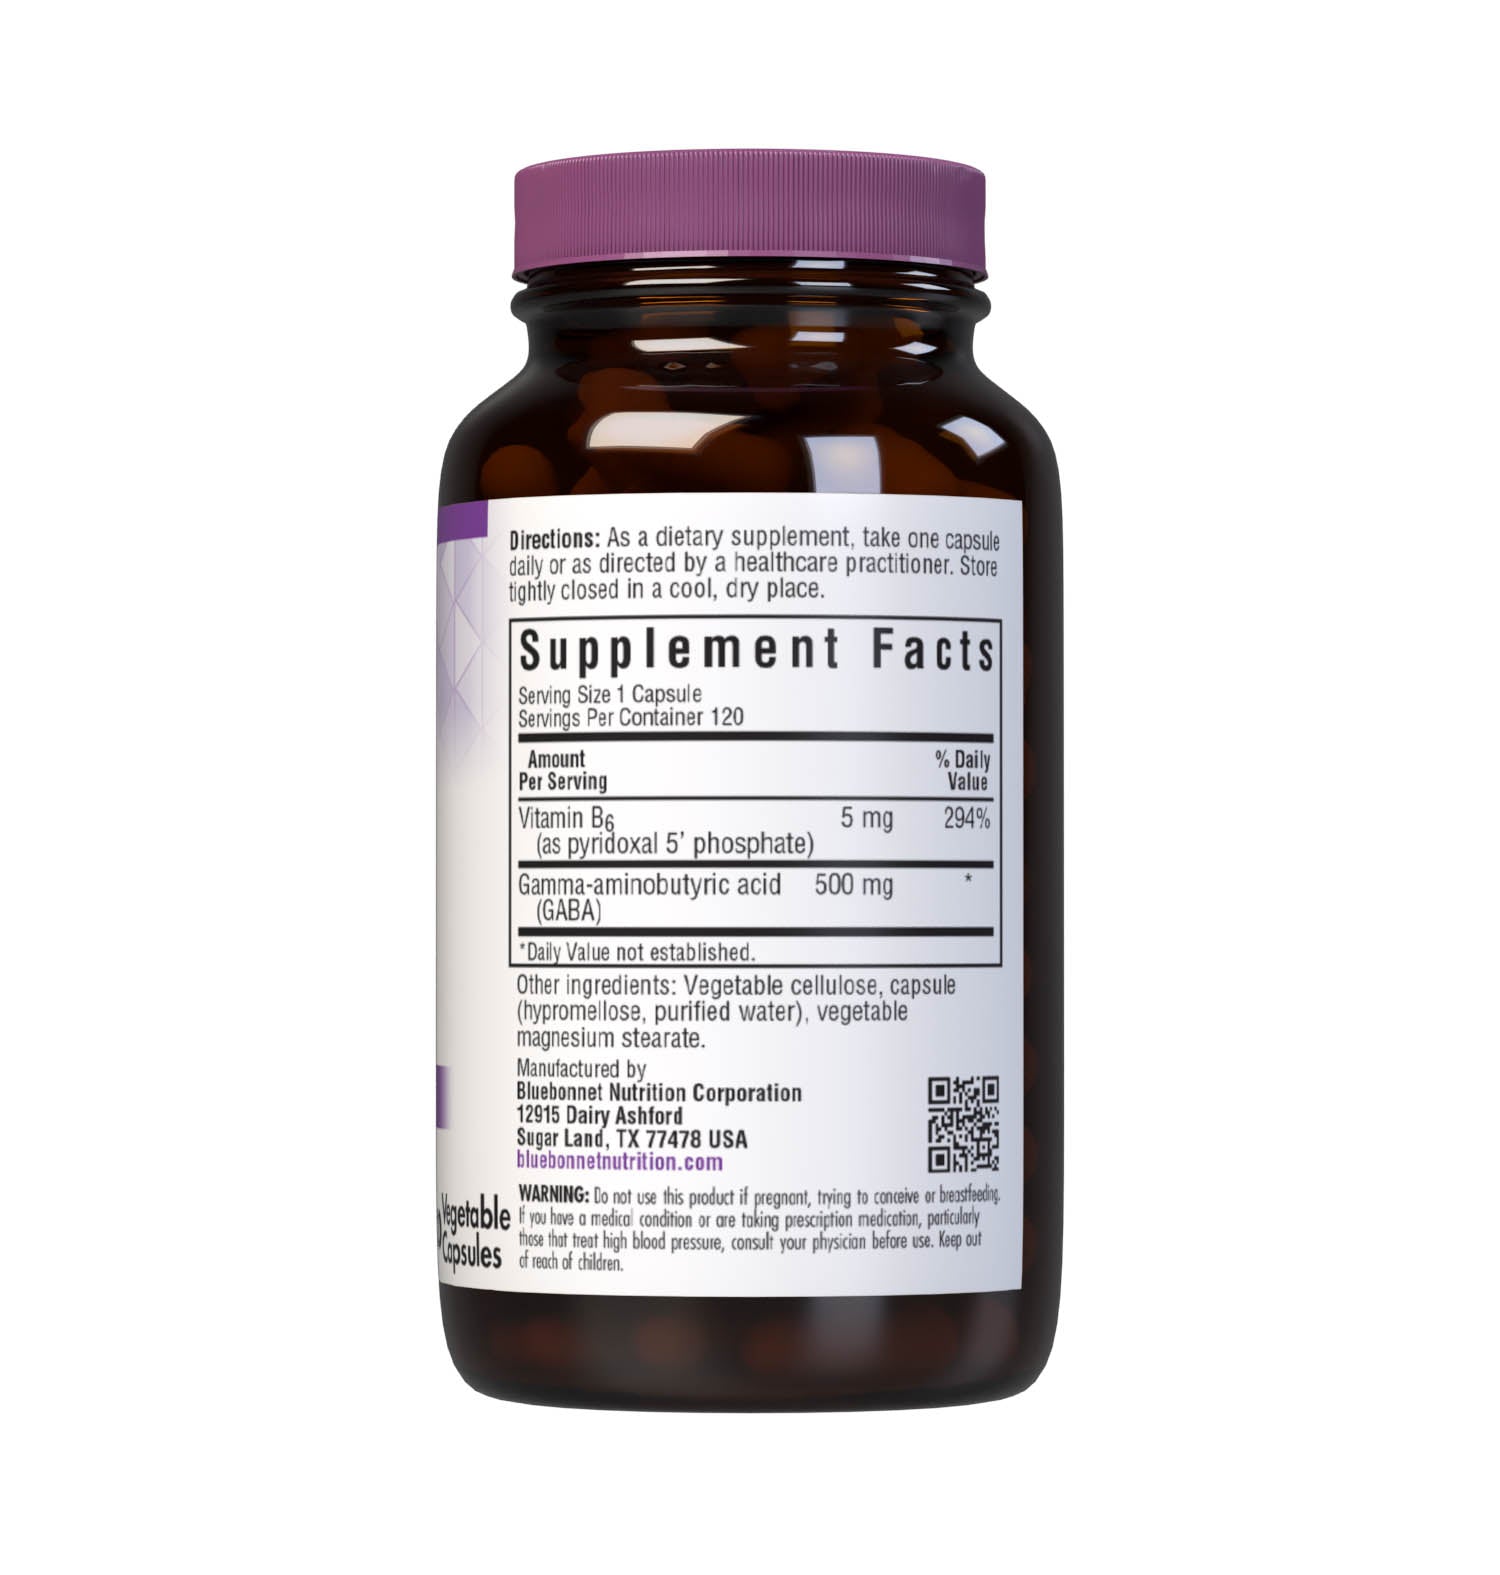 Bluebonnet’s GABA 500 mg 120 Vegetable Capsules are specially formulated to help the body and mind adapt and cope with occasional stressors while supporting an overall sense of relaxation utilizing a combination of gamma-aminobutyric acid (GABA) and the cellular active, coenzyme form of vitamin B6, pyridoxal 5’ phosphate. Supplement facts panel. #size_120 count